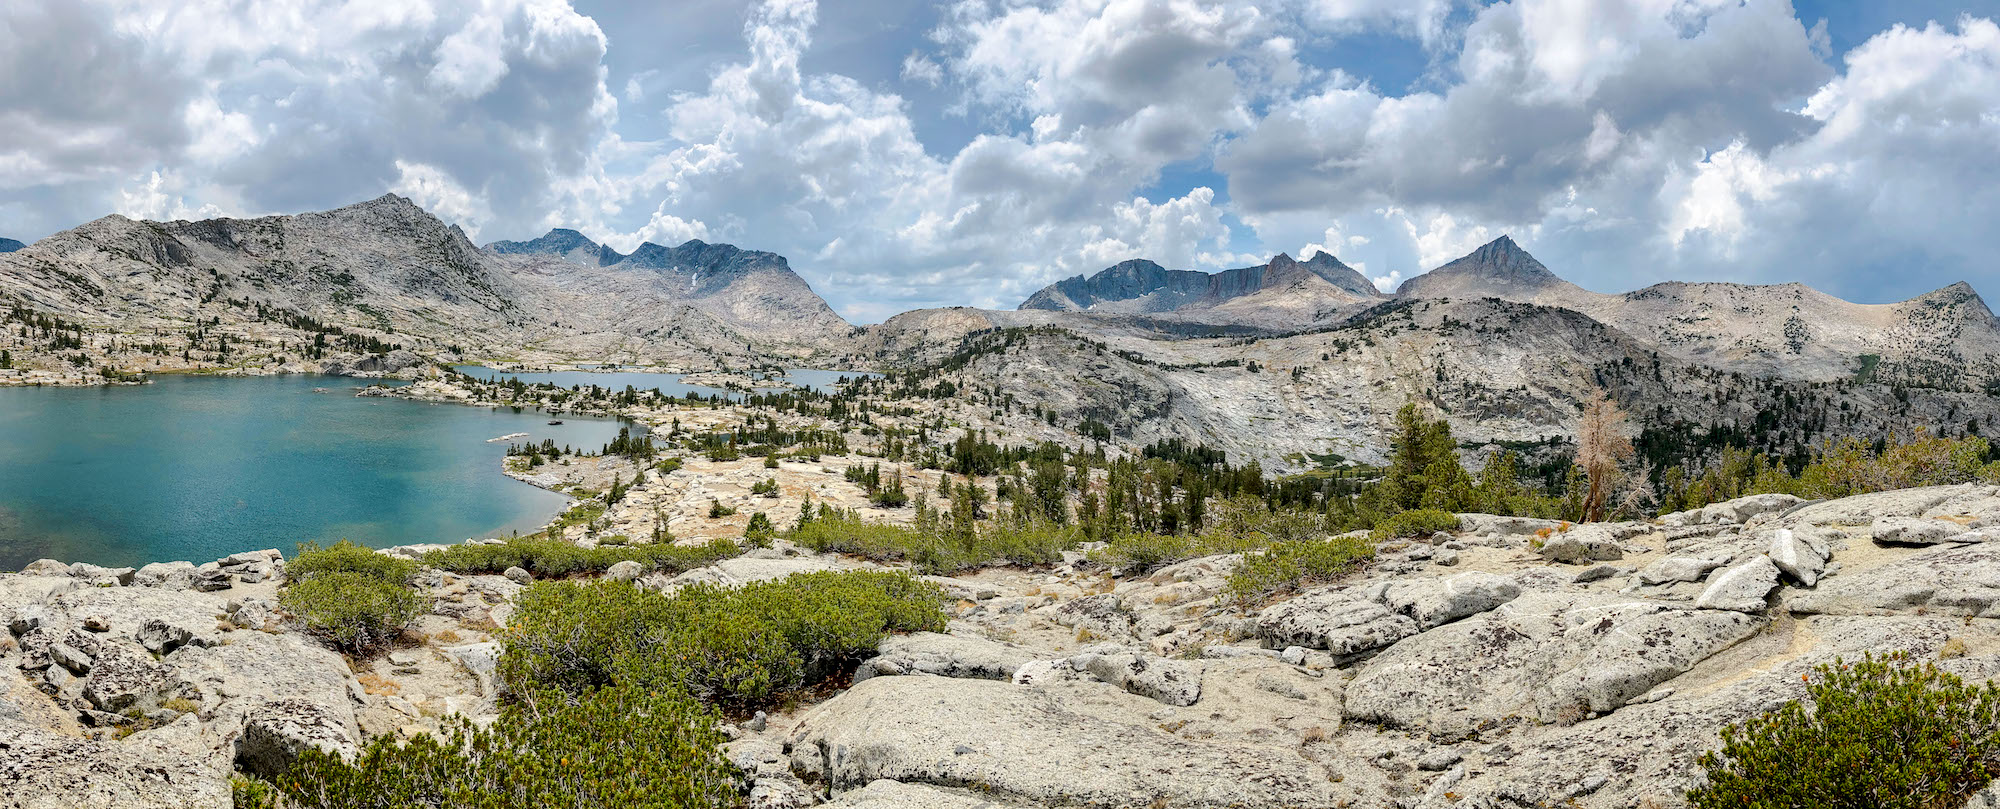 Storm clouds at Marie Lake along the John Muir Trail - Pacific Crest Trail